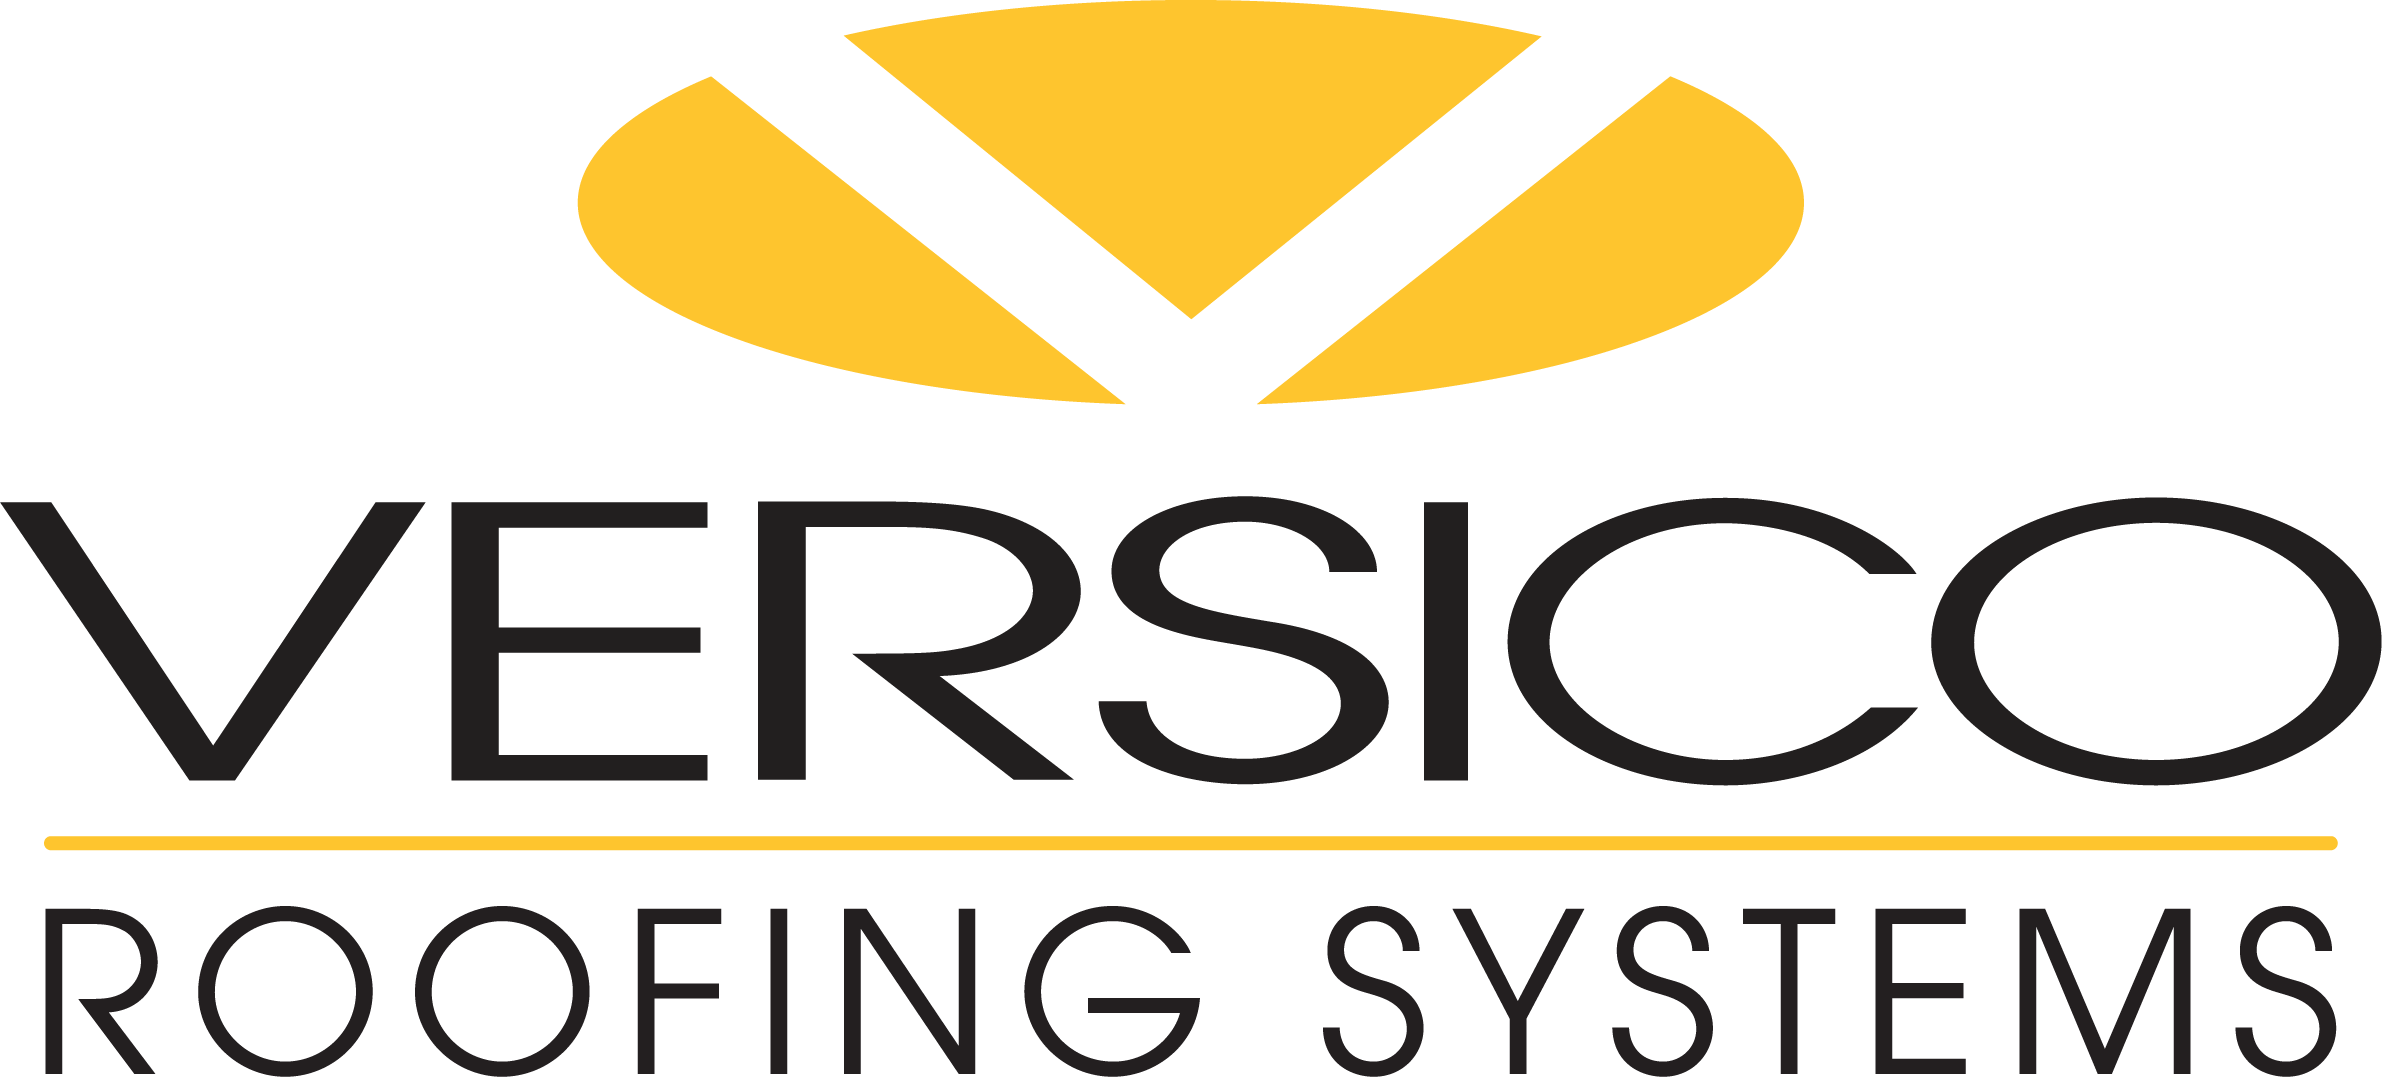 Versico Roofing Systems roof membrane manufacturer